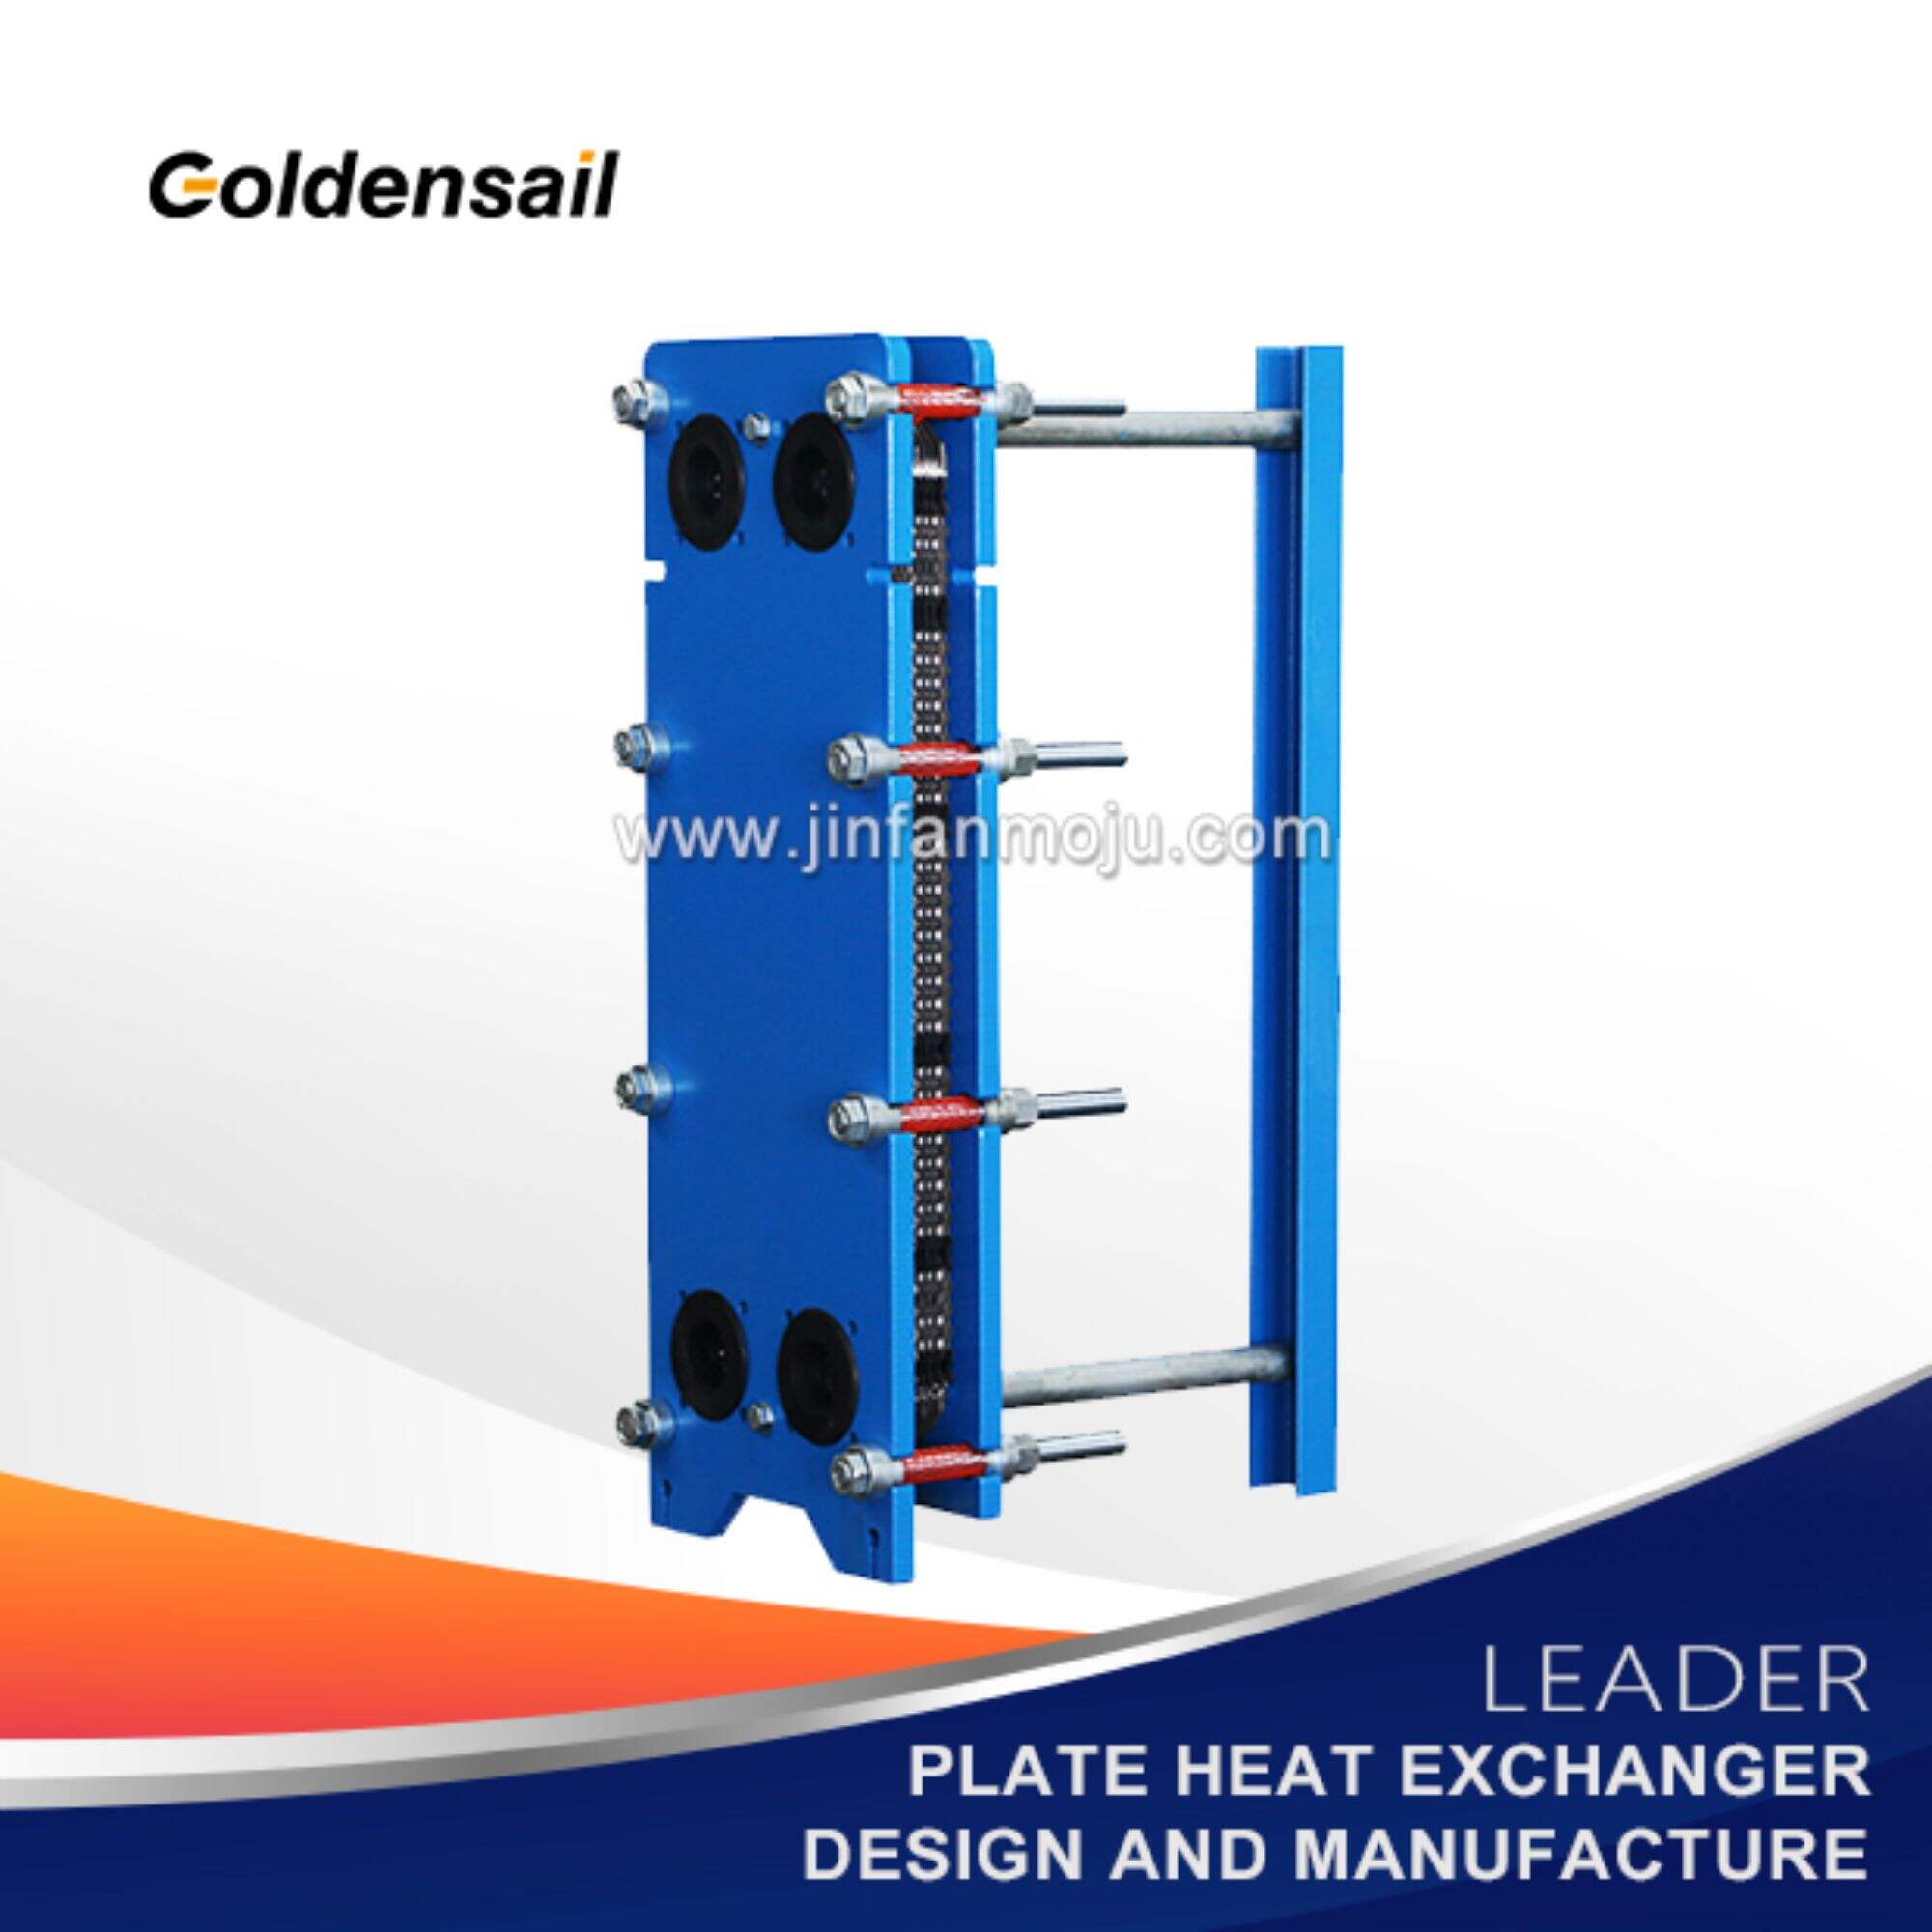 Stainless steel gasketed plate and frame heat exchangers for sanitary applications